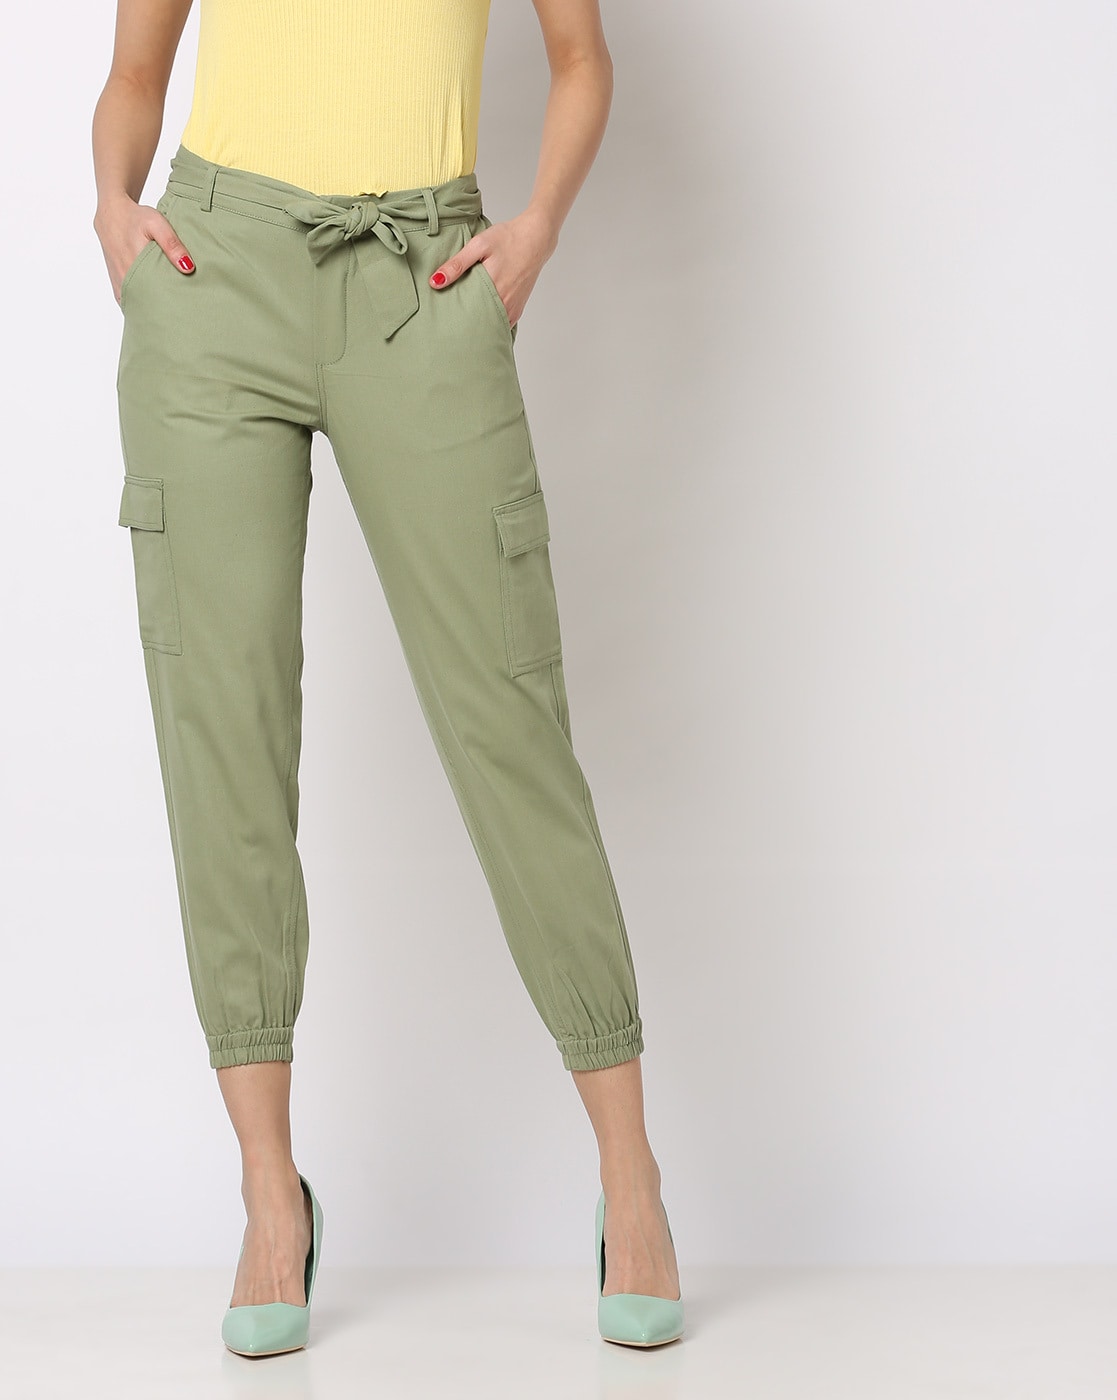 Buy Black Trousers & Pants for Women by Outryt Online | Ajio.com